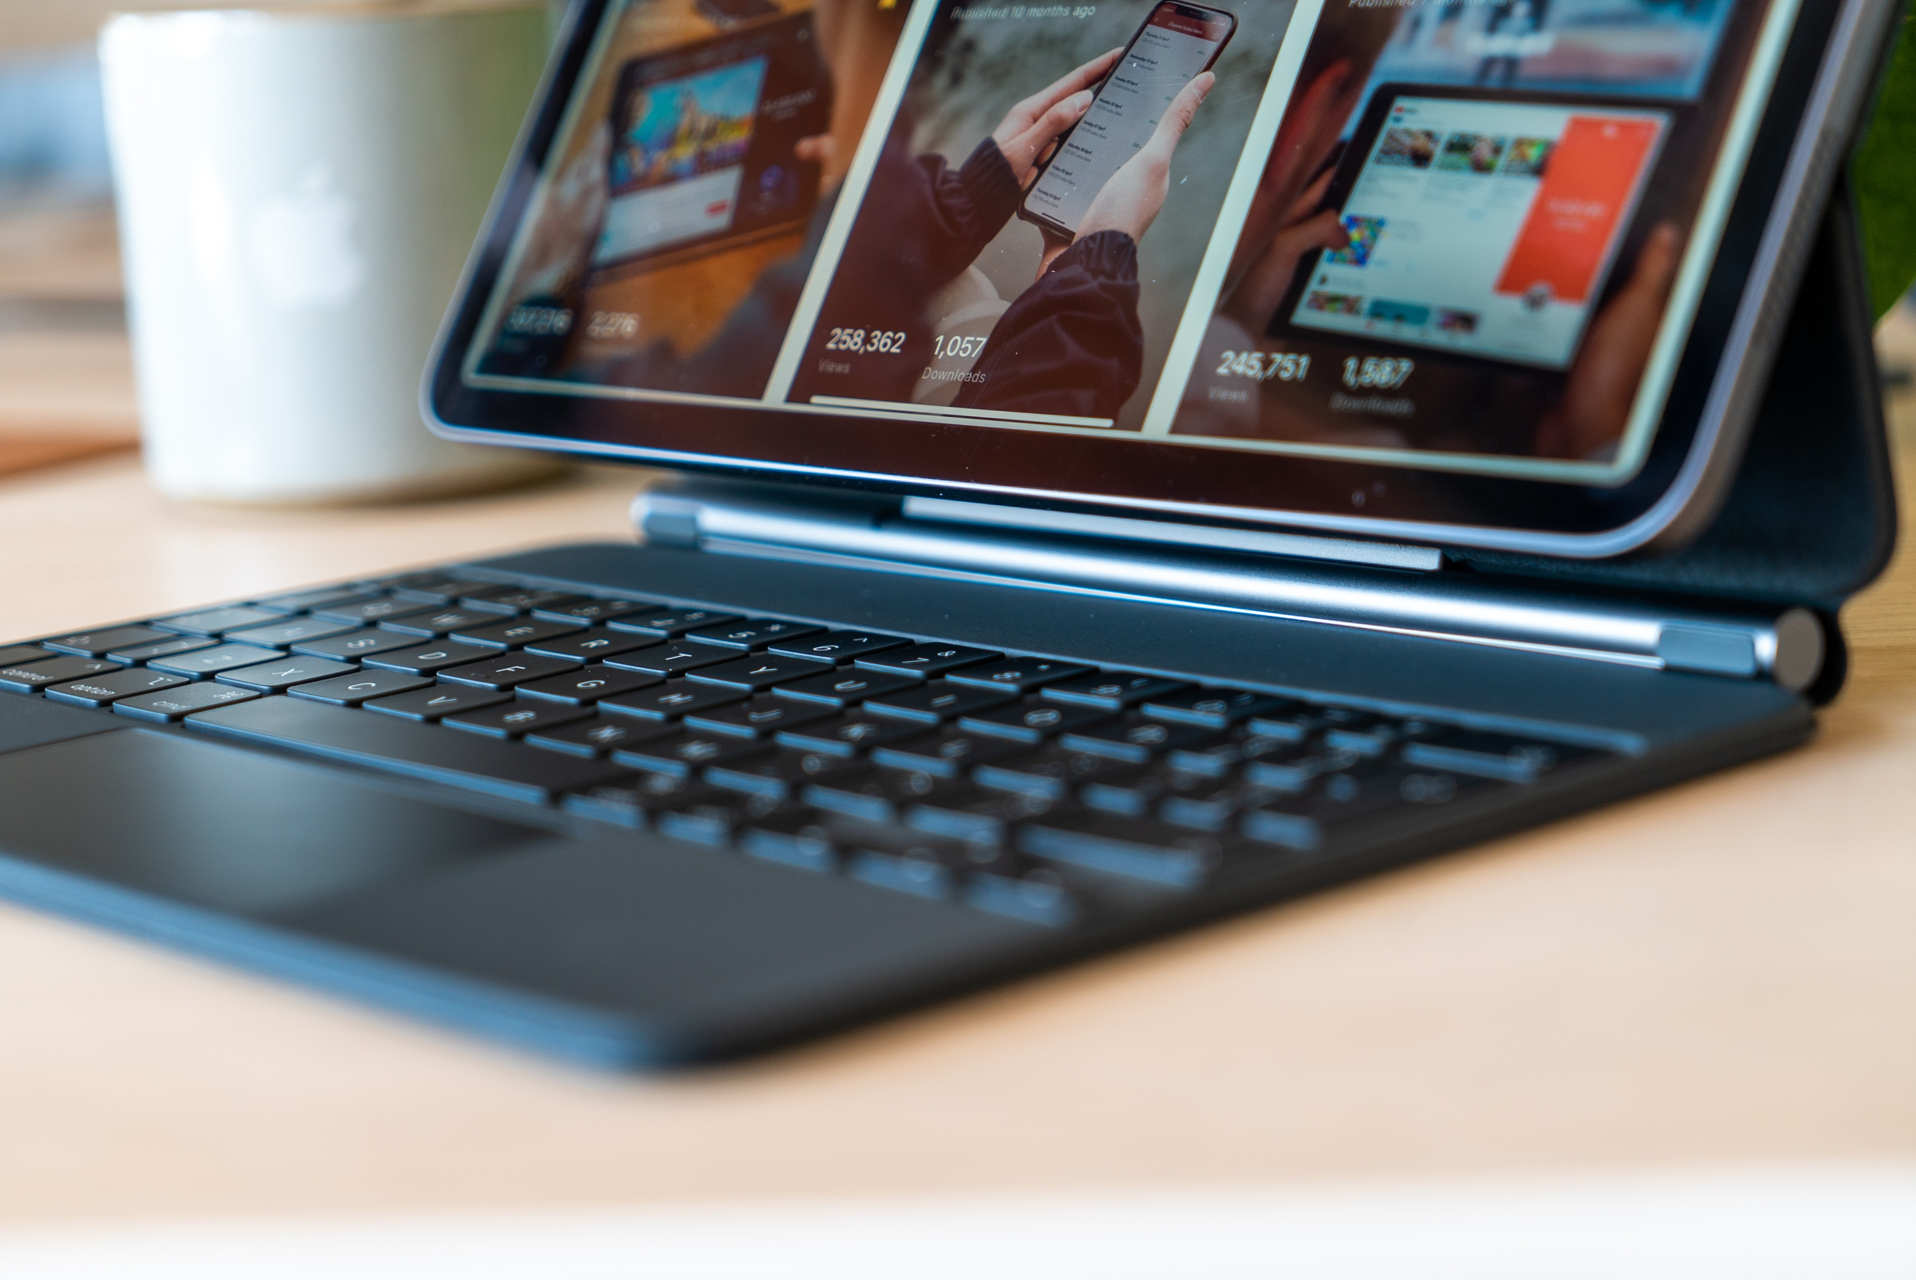 Surface Pro 3 deals to grab today